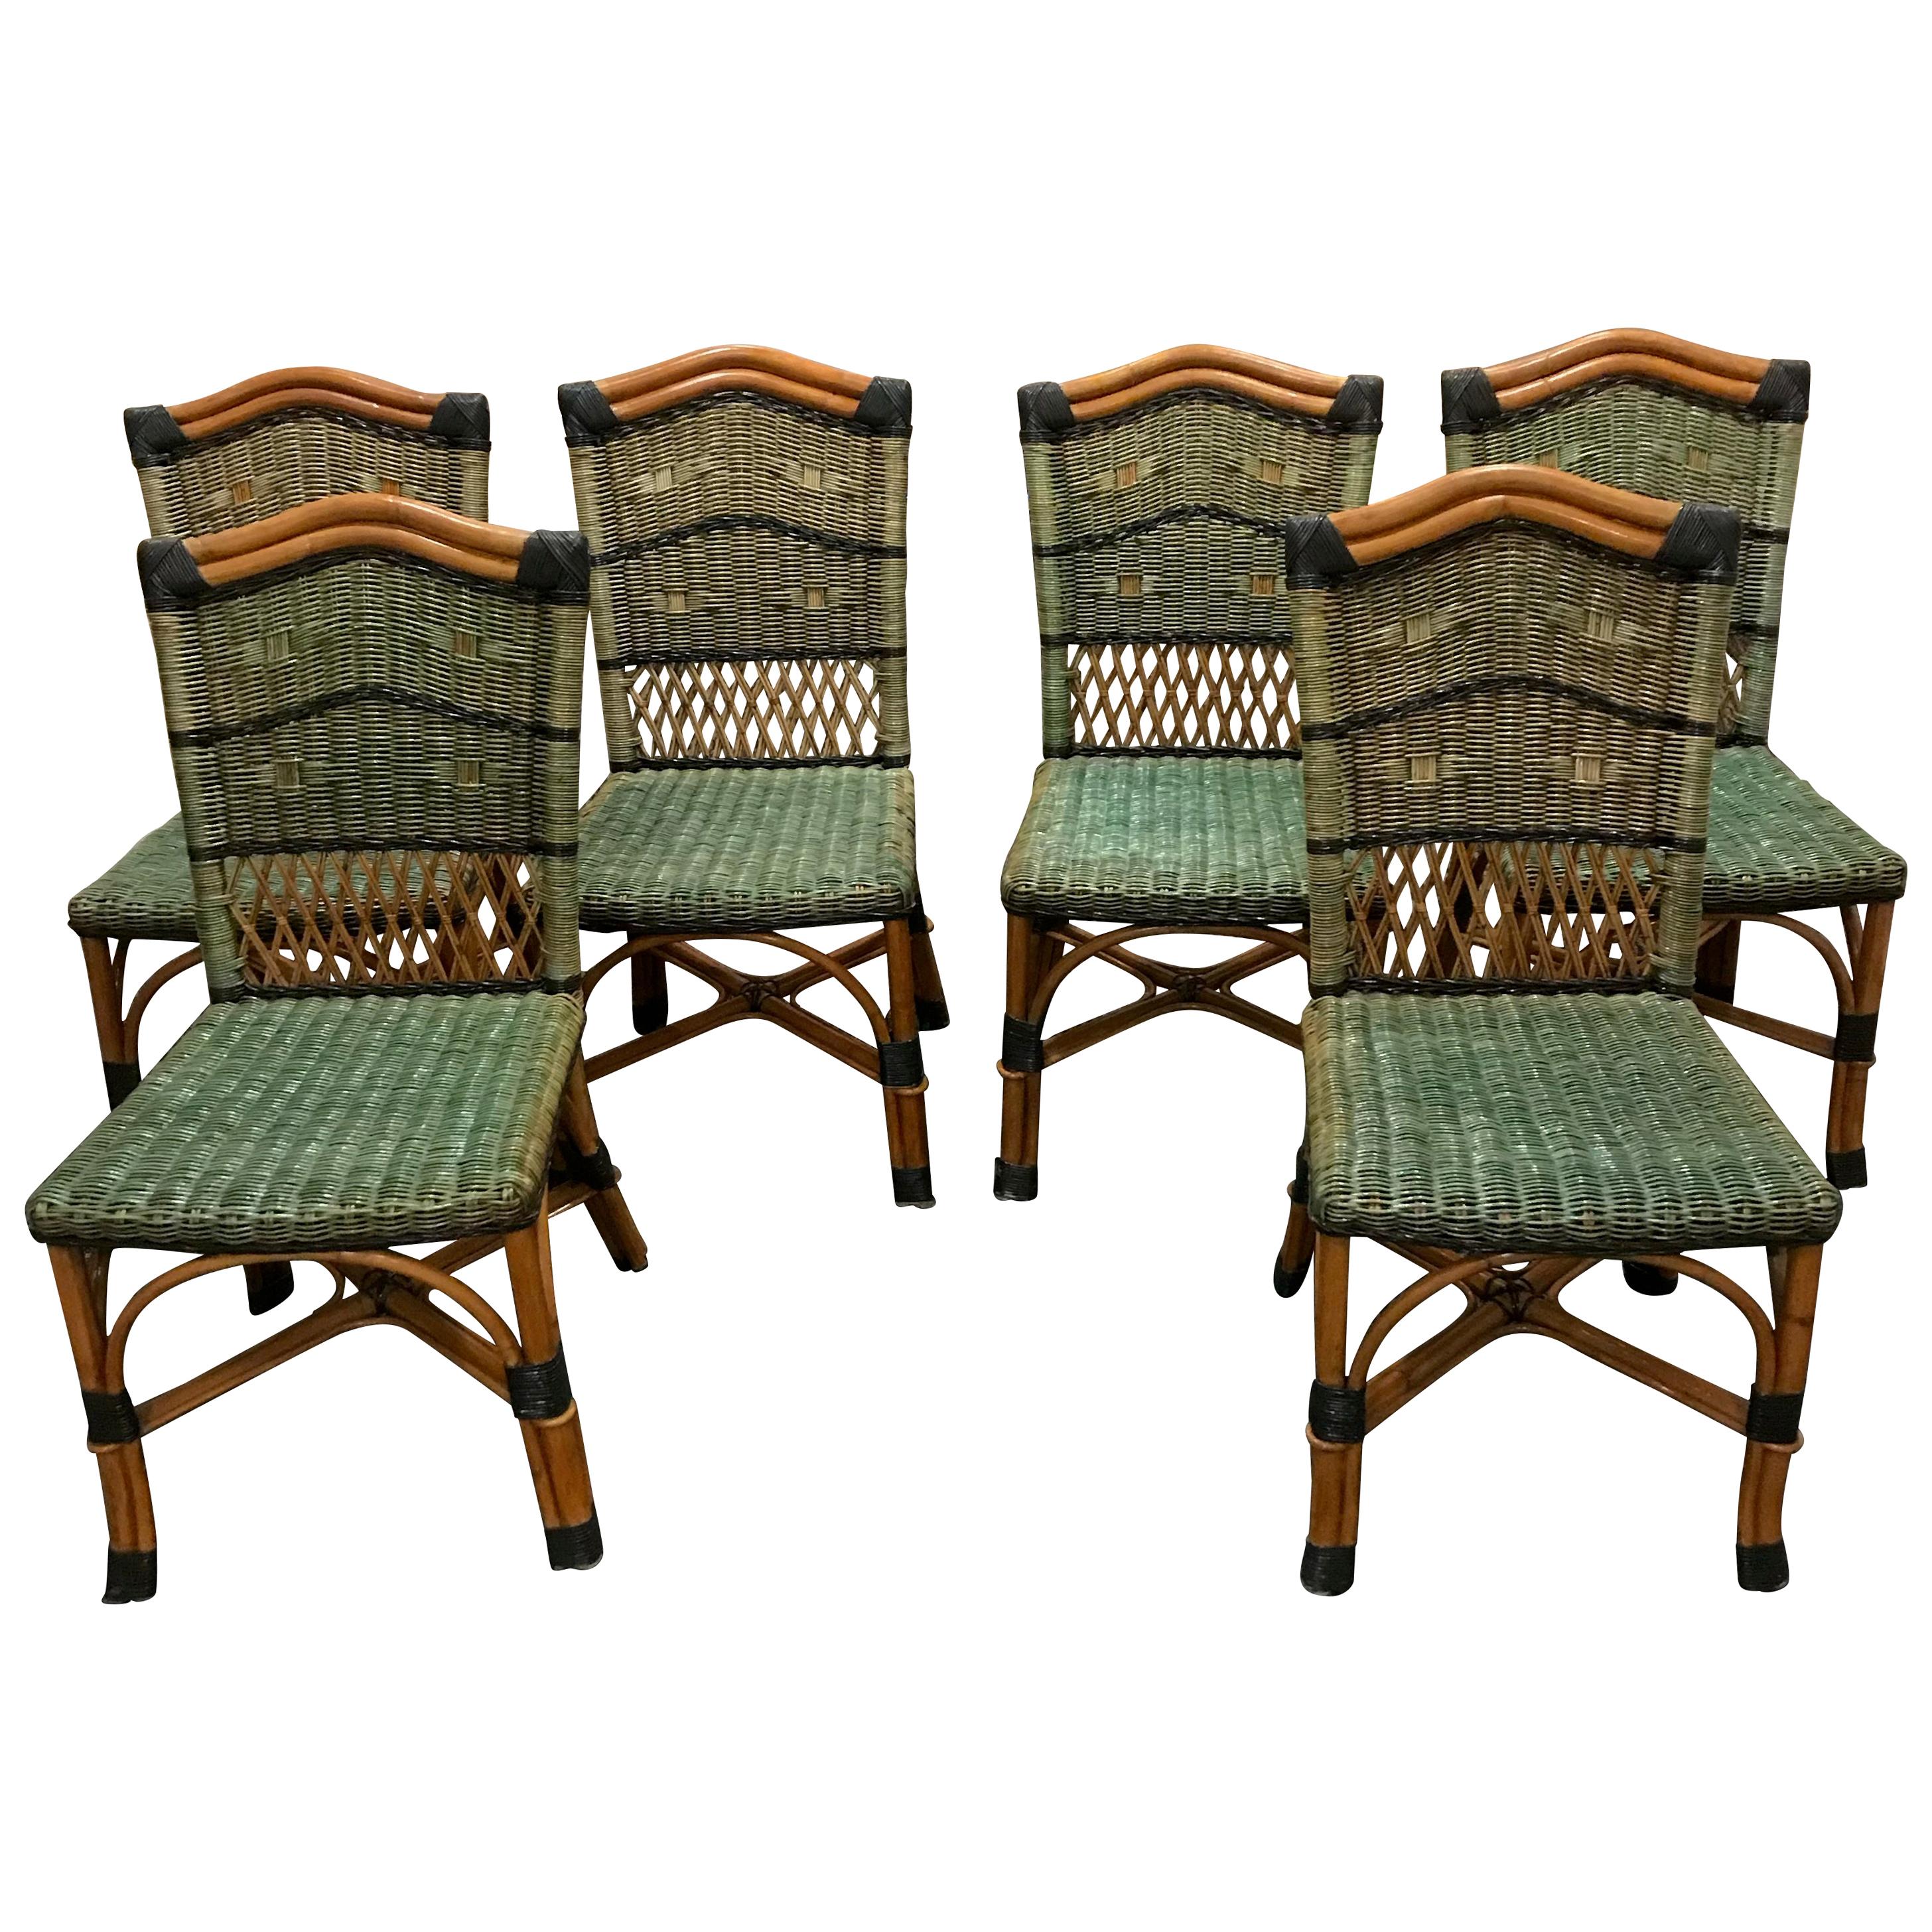 Charming Set of 6 Grange Stained Rattan and Wood Dining or Patio Chairs